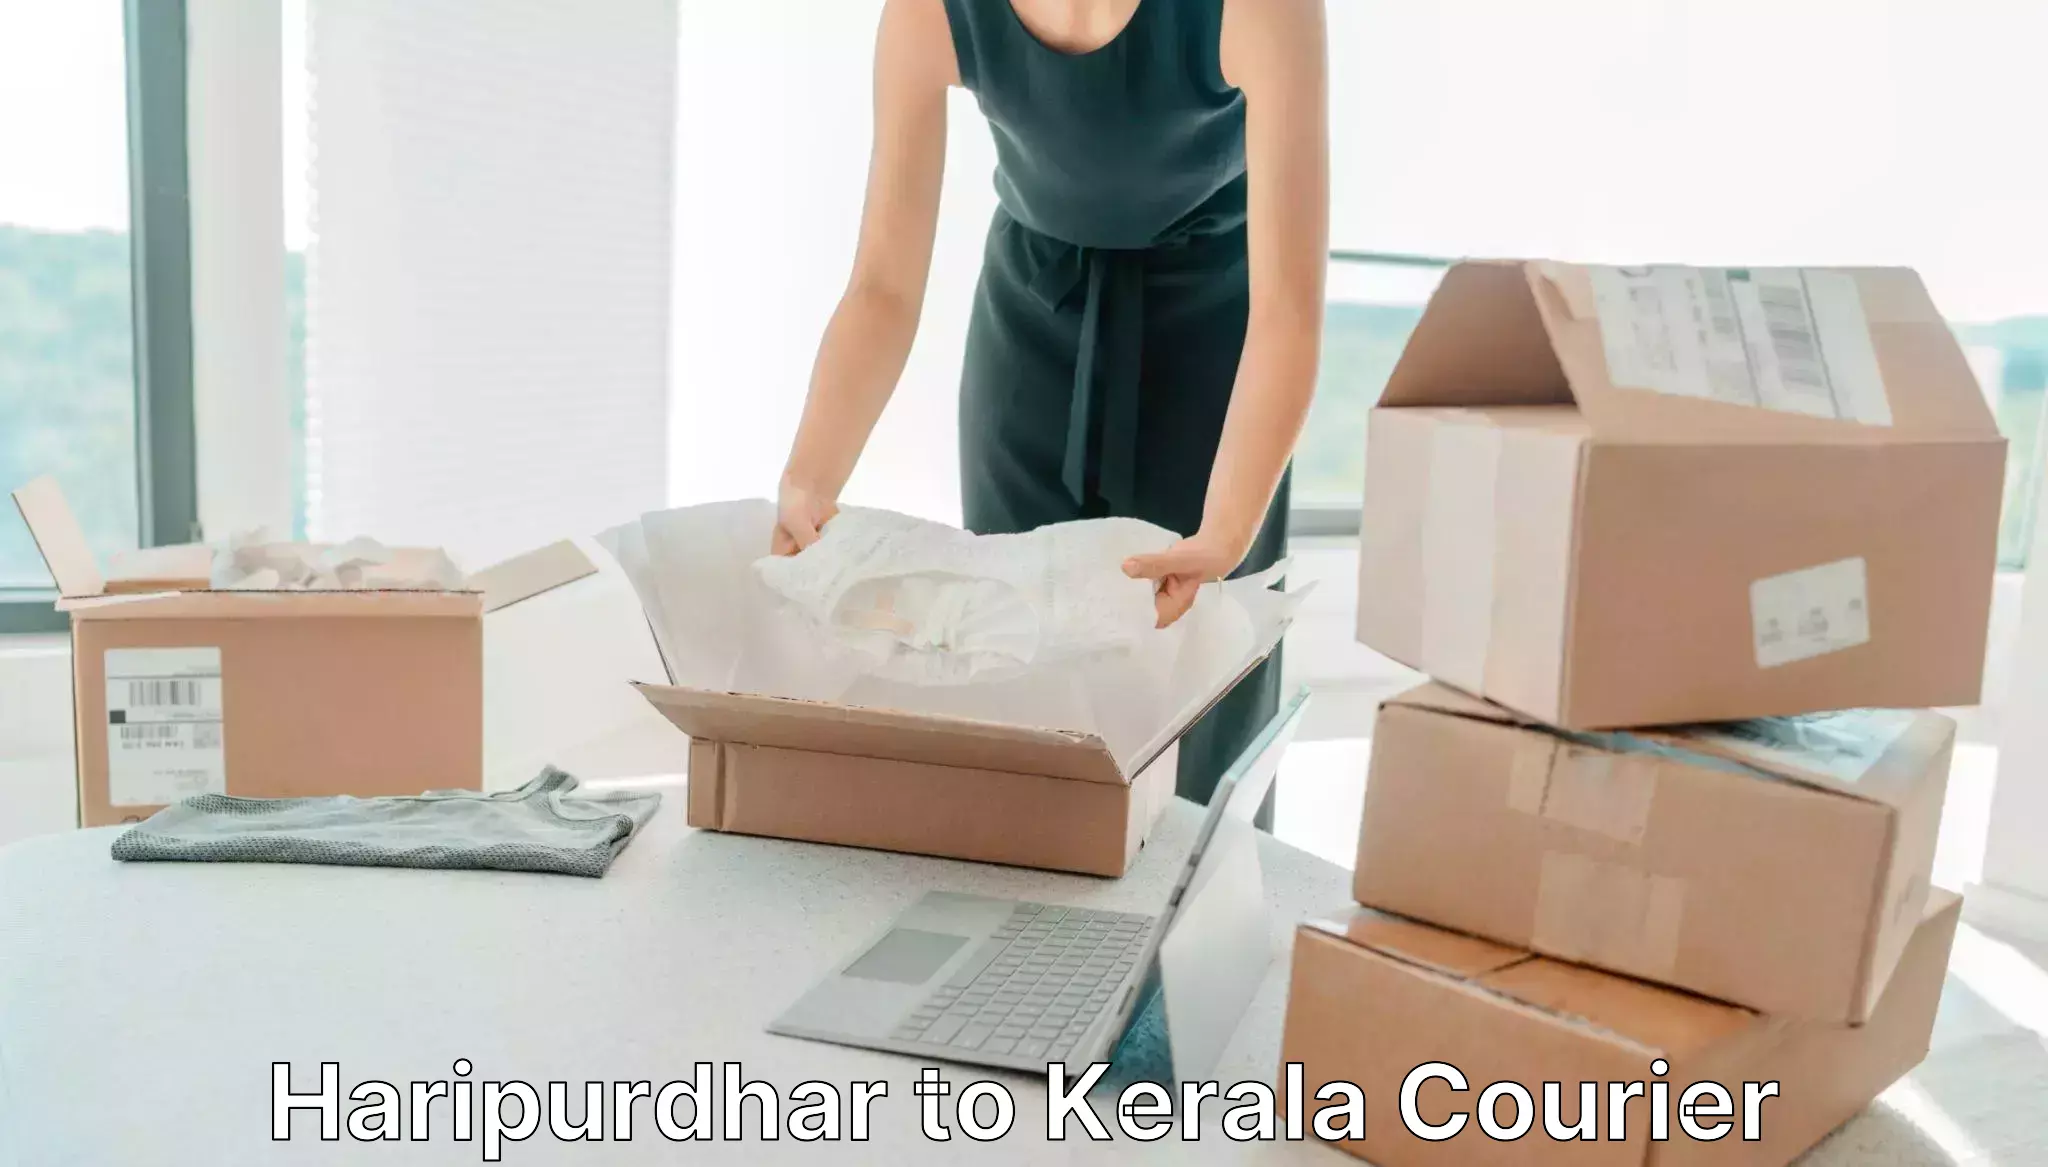 Personalized courier experiences Haripurdhar to Kerala